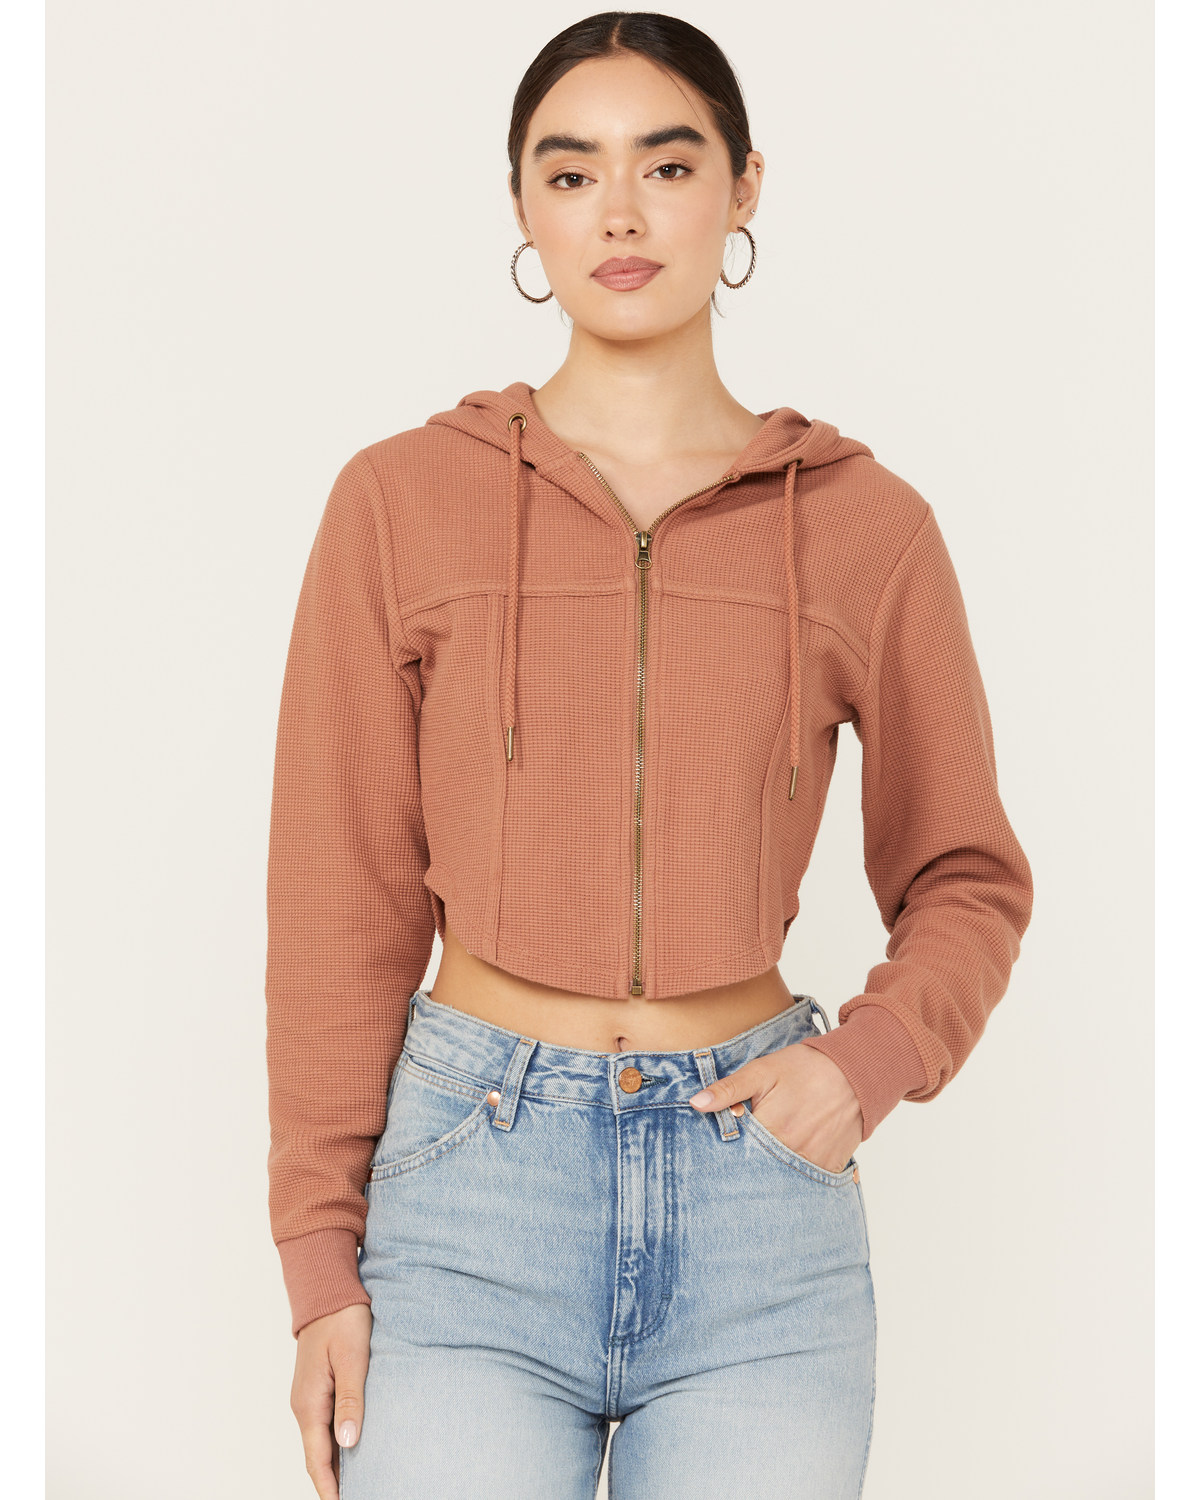 Cleo + Wolf Women's Corset Cropped Hoodie